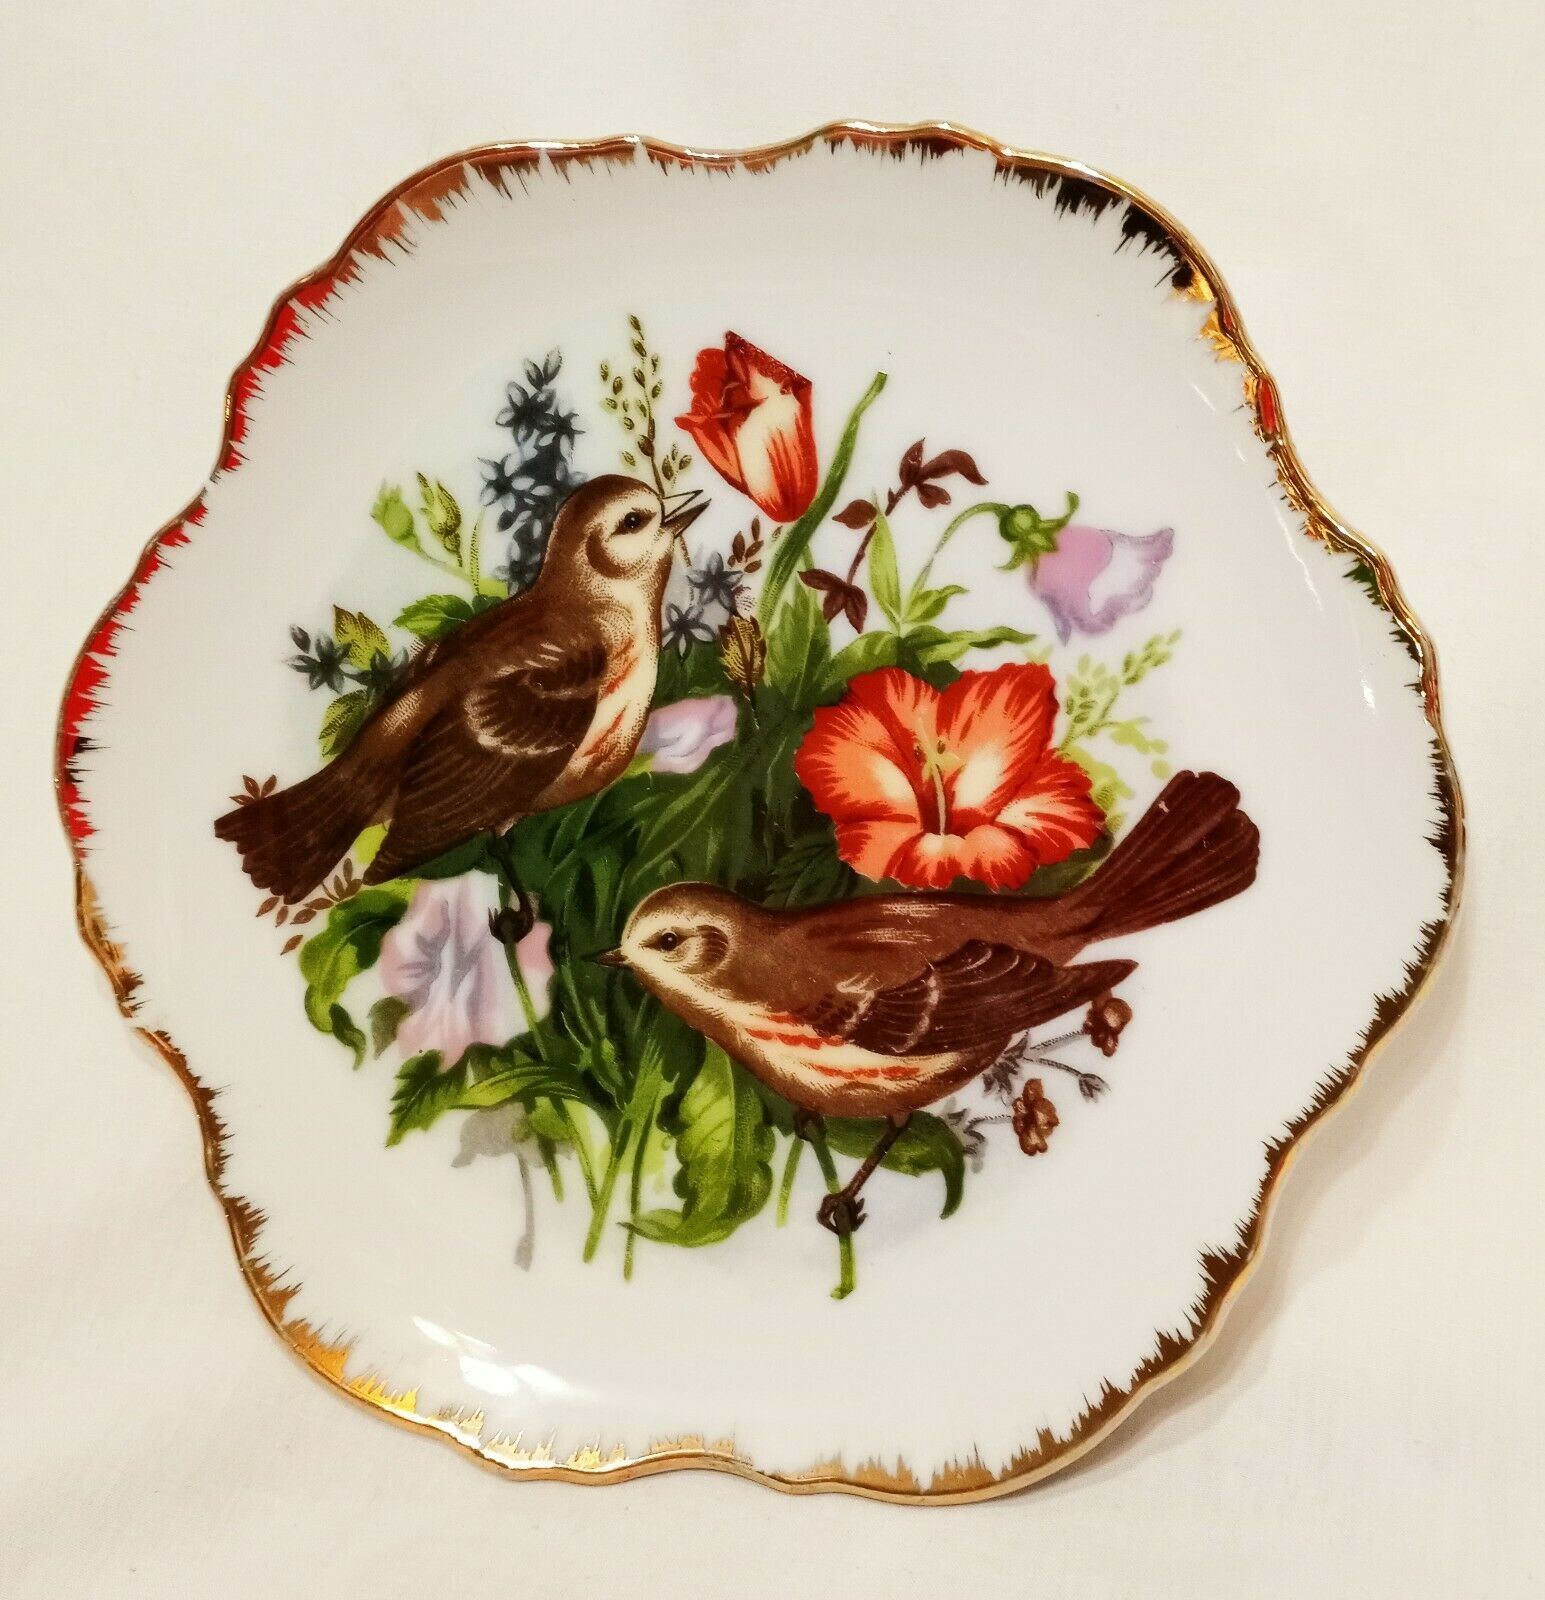 Primary image for  Brown Bird Flowers Vintage Plate Decorative Japan 7.5" Porcelain Scallop Edge 